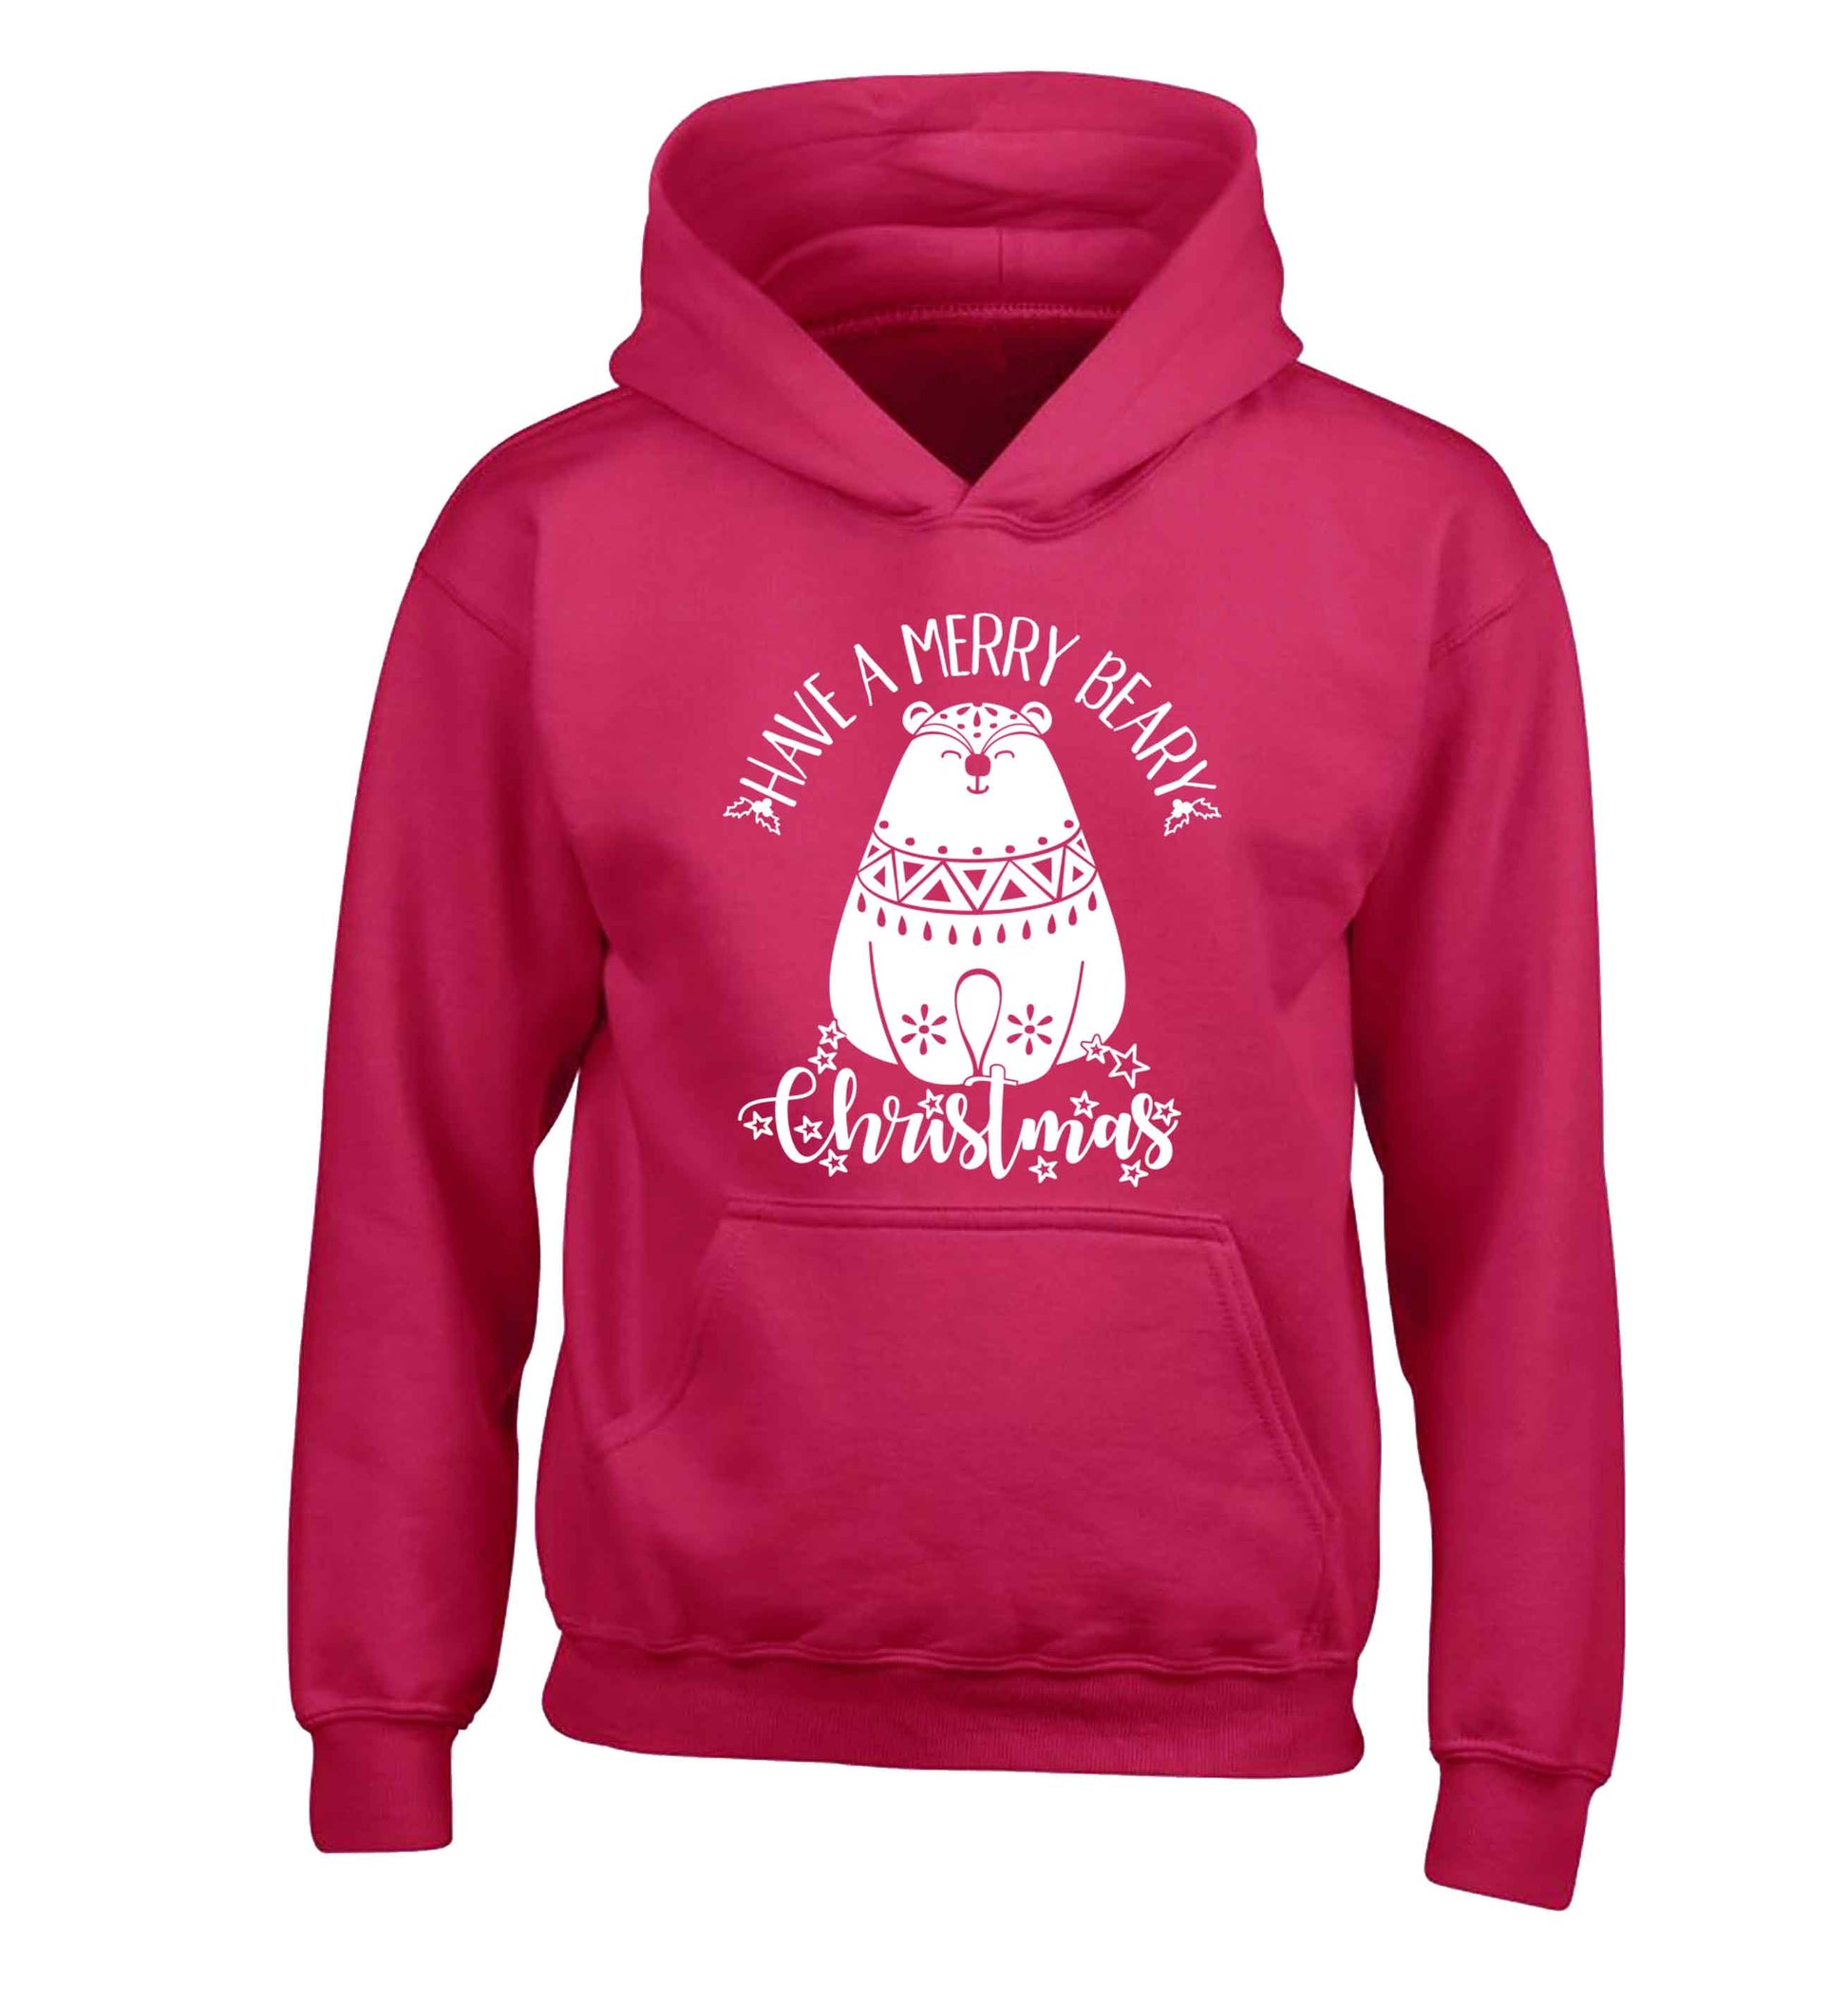 Have a merry beary Christmas children's pink hoodie 12-13 Years